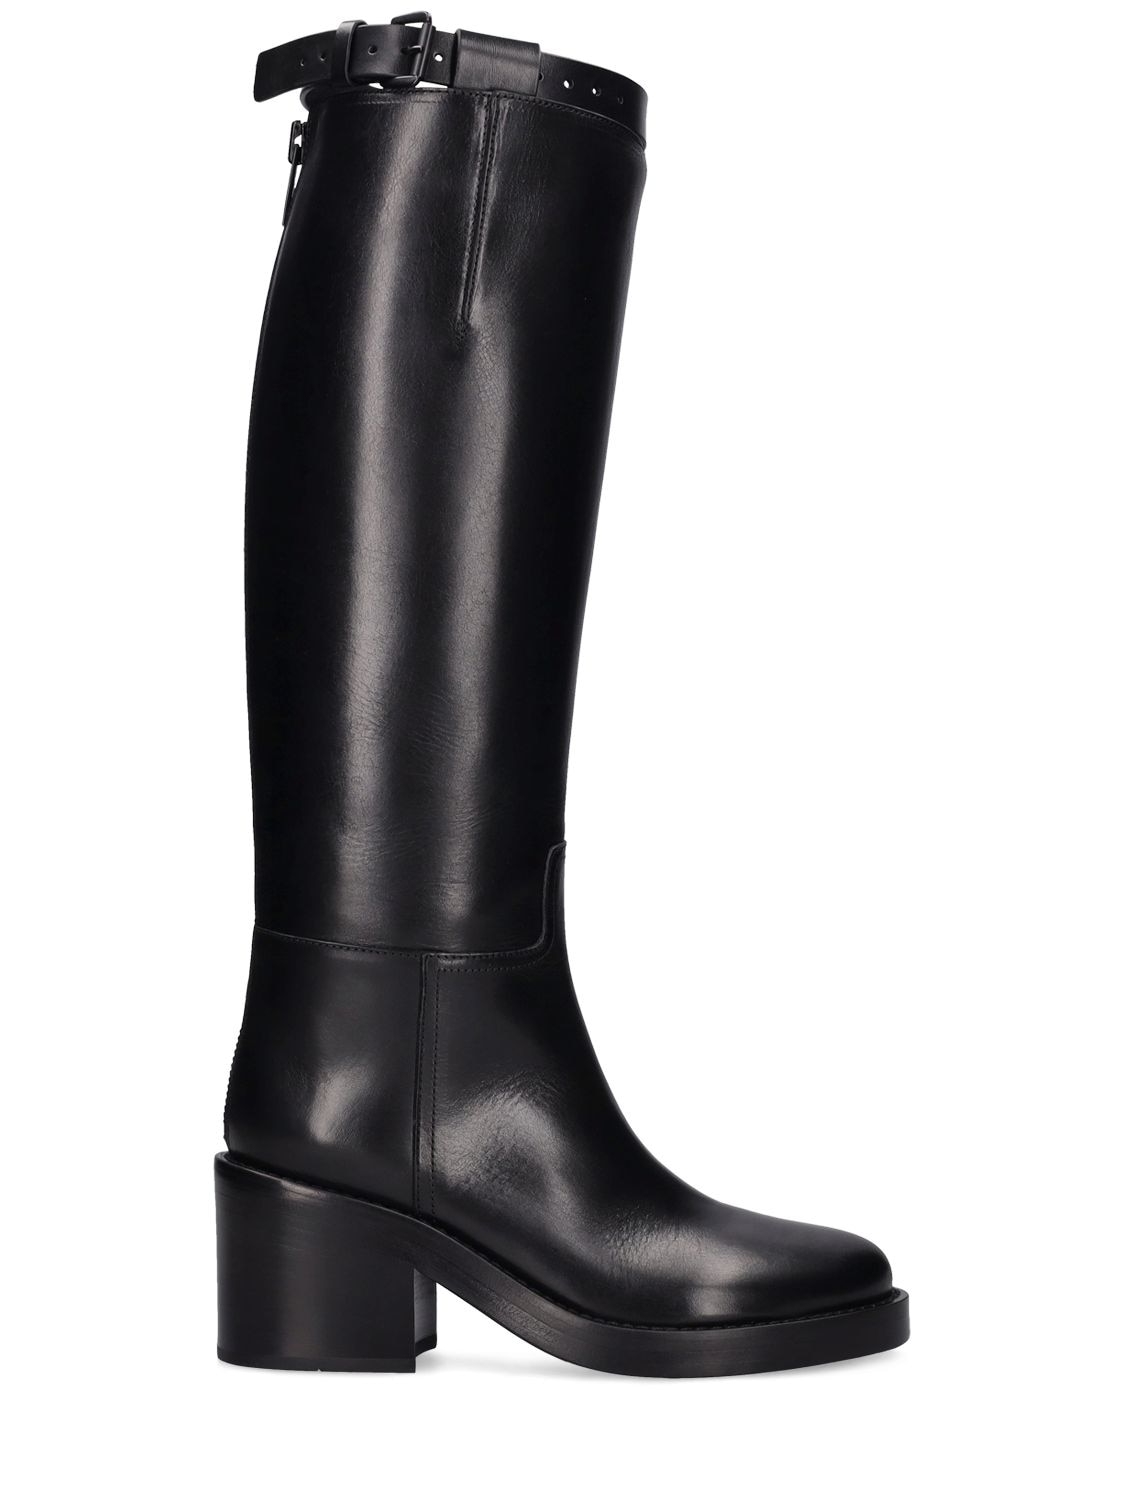 ANN DEMEULEMEESTER 50MM STAN LEATHER RIDING BOOTS